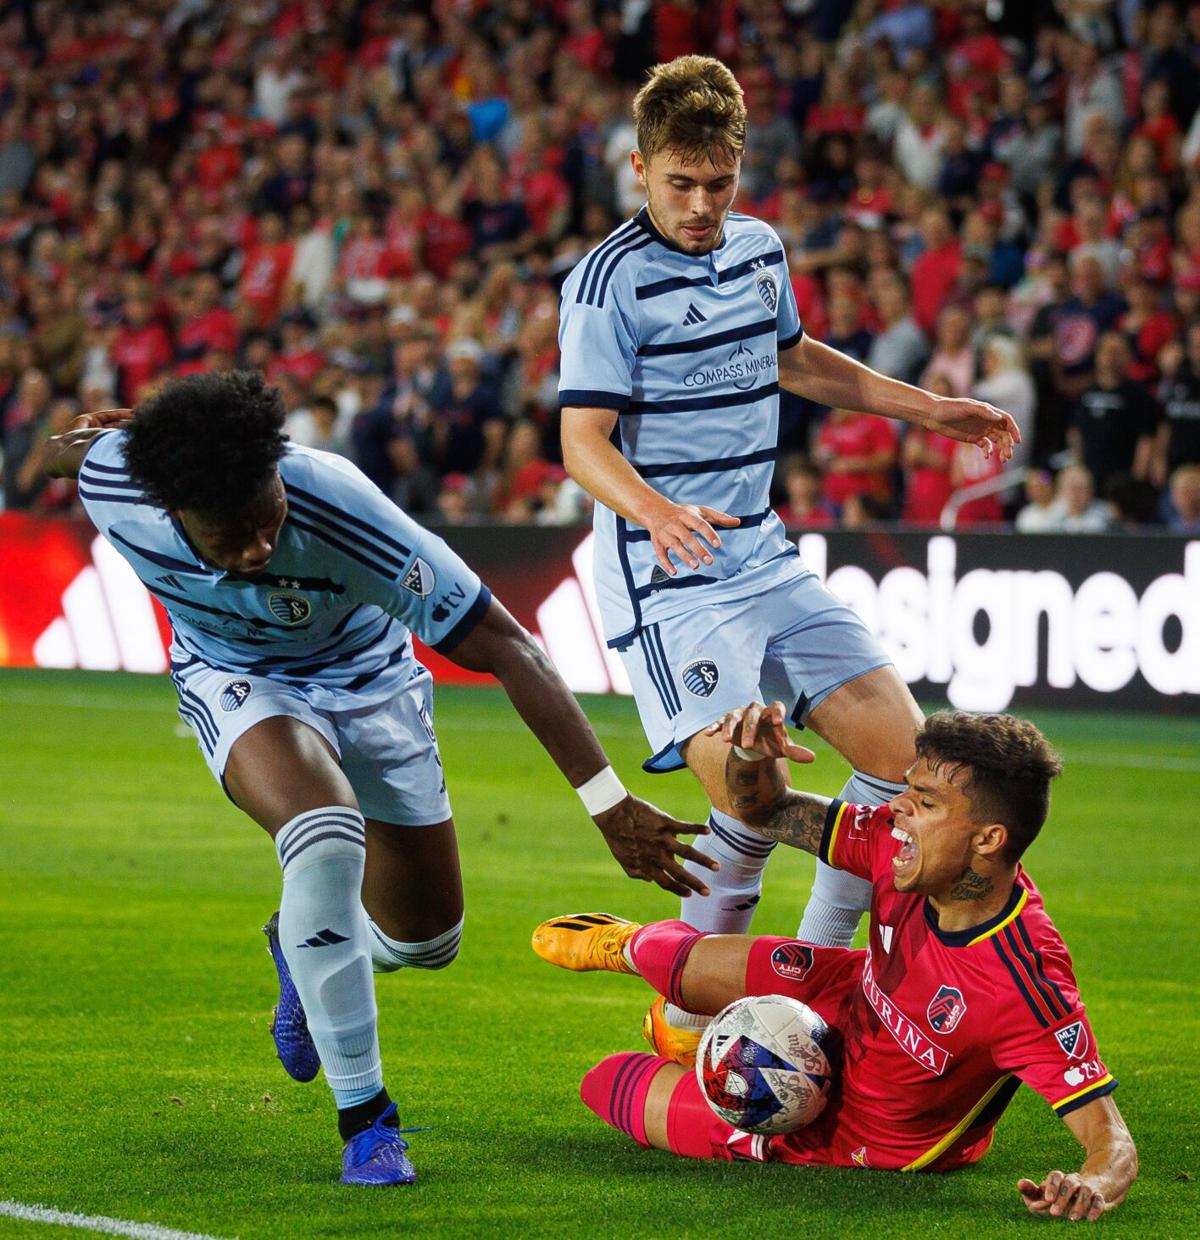 CITY SC, Sporting KC amp up rivalry ahead of first match